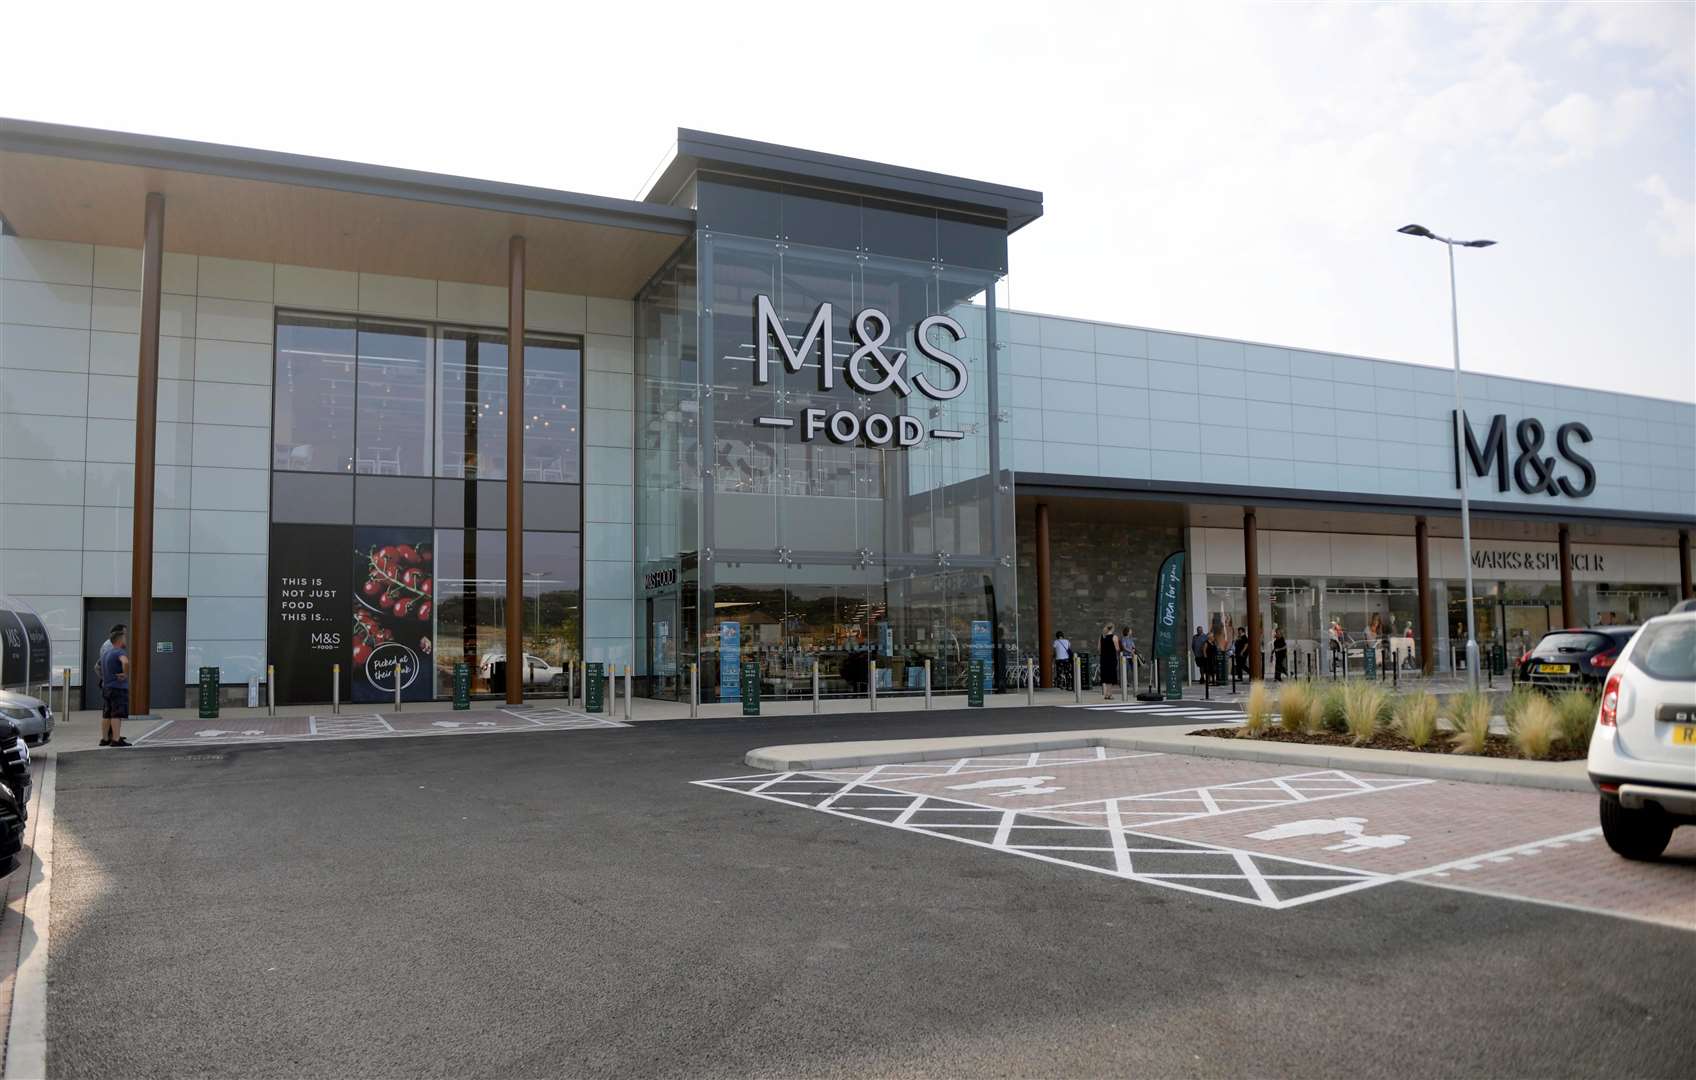 M&S opened a flagship store on the edge of town in Eclipse Park